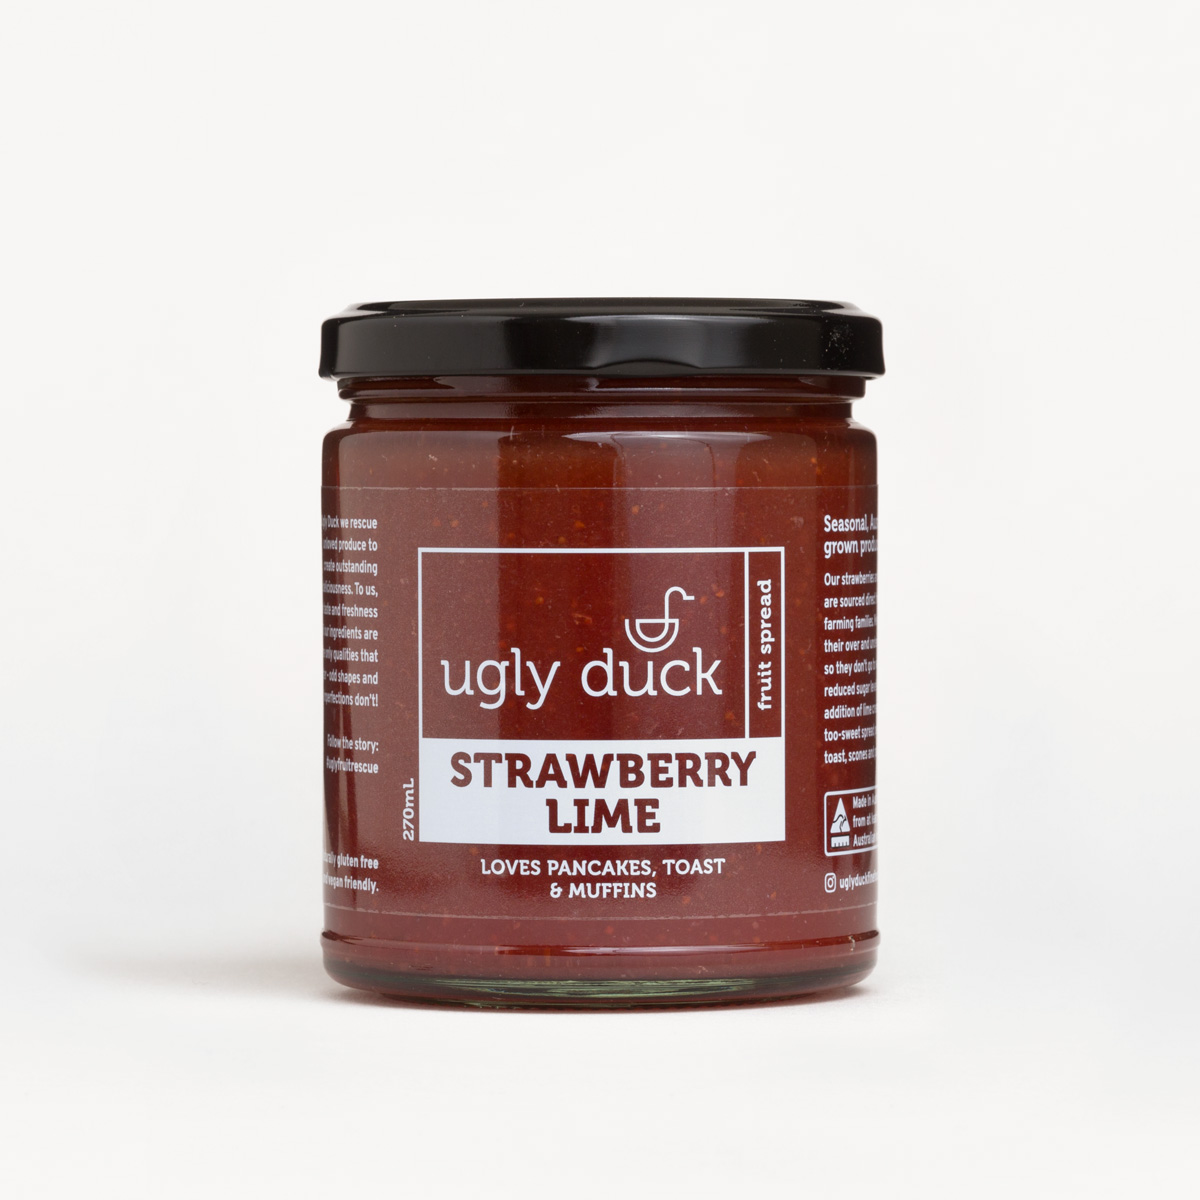 Strawberry Lime Spread jar with label